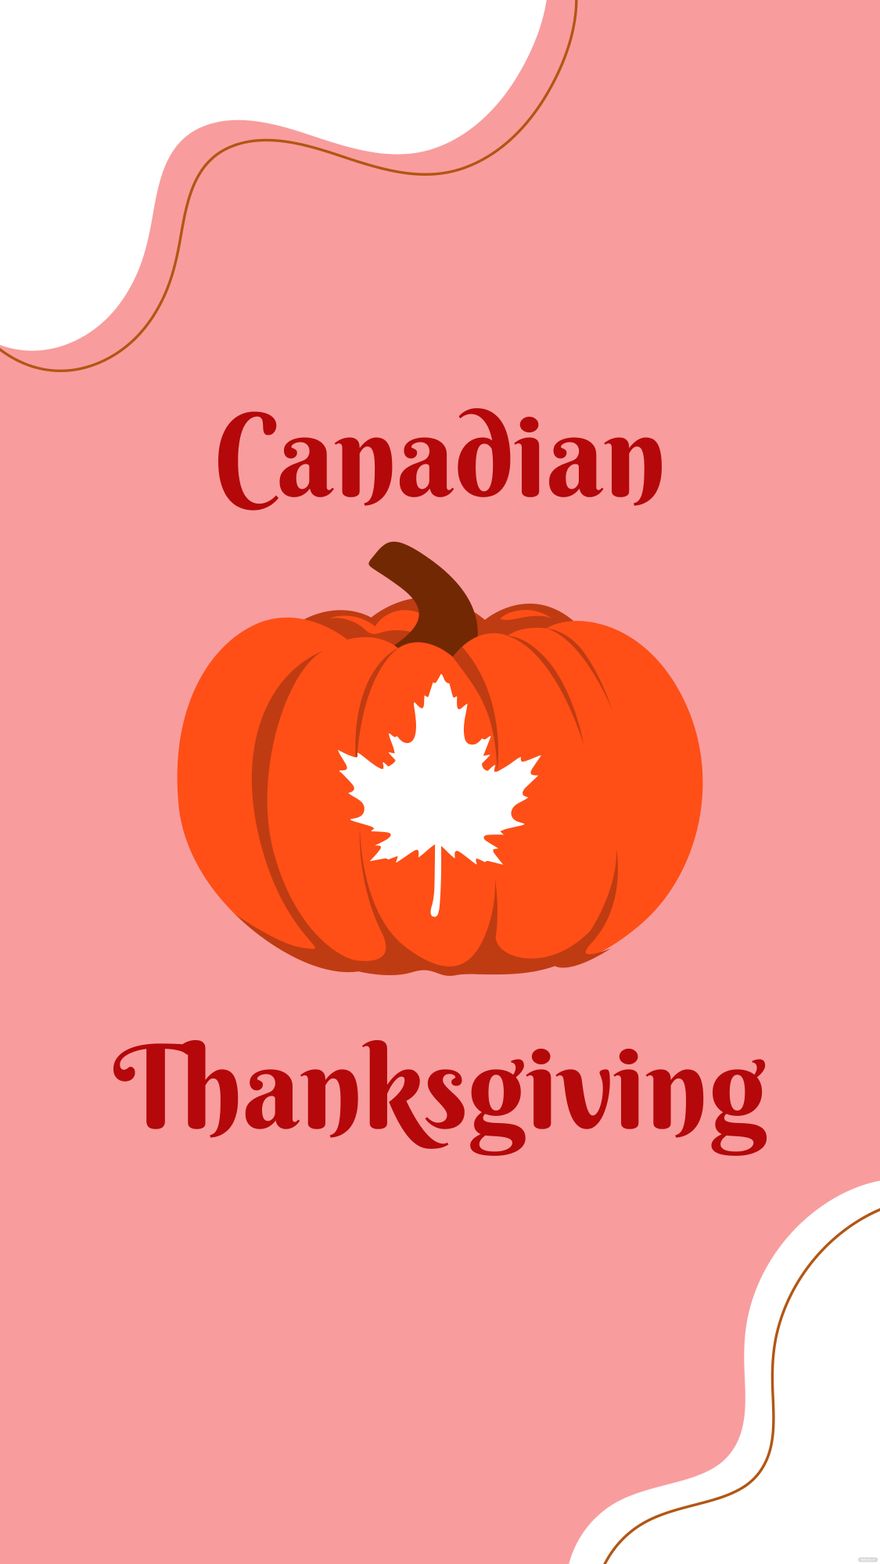 Canadian Thanksgiving iPhone Background in PDF, Illustrator, PSD, EPS, SVG, JPG, PNG